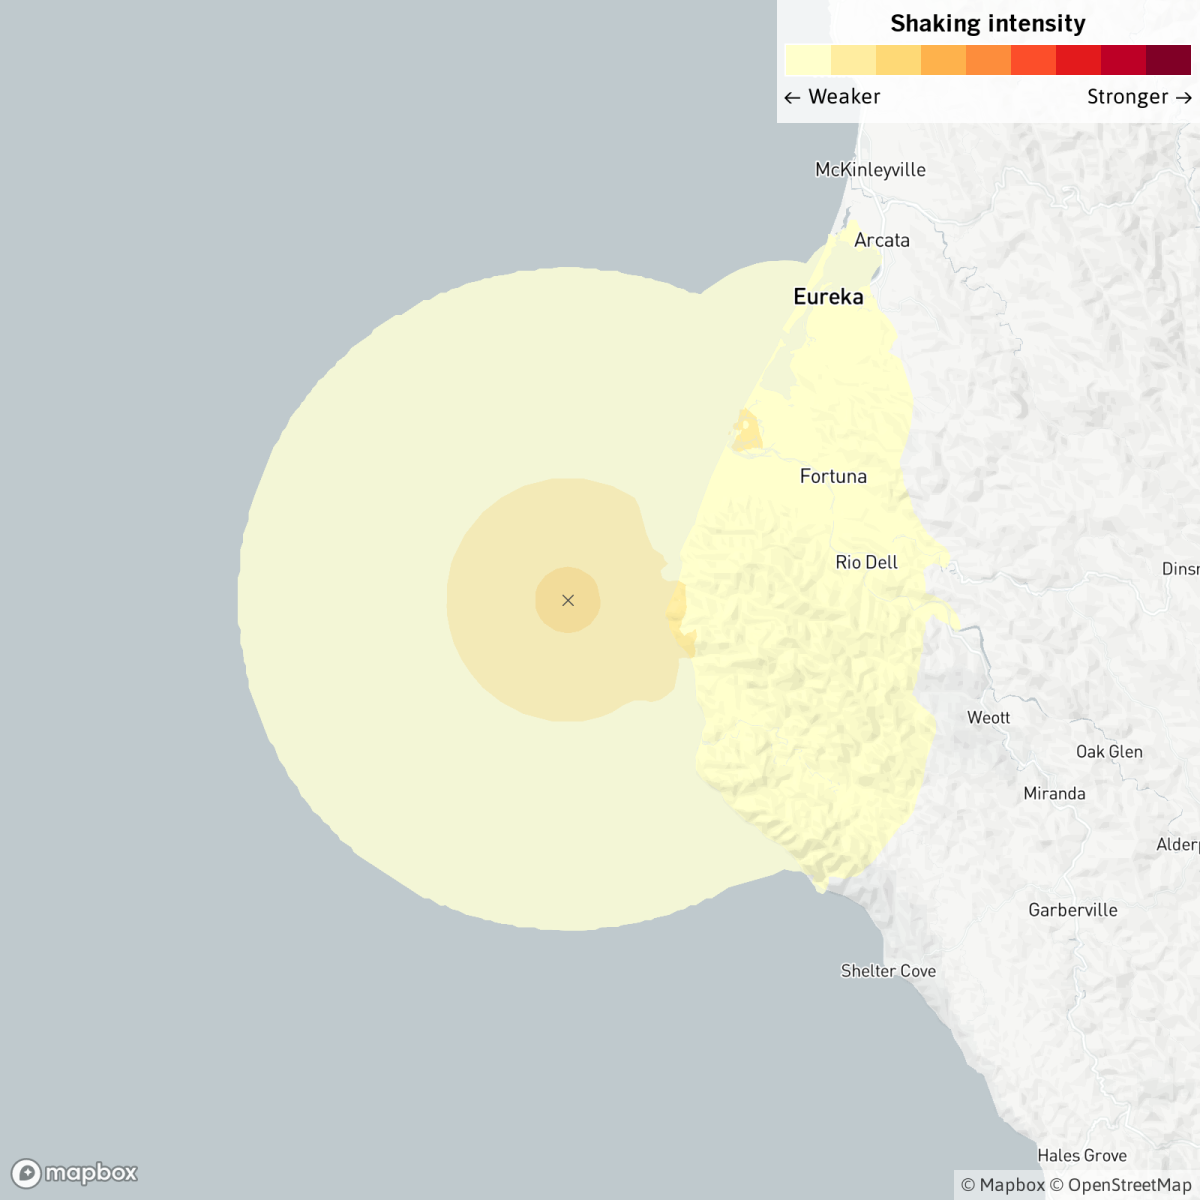 A magnitude 4.2 earthquake was reported May 19 at 8:58 a.m. 22 miles from Fortuna, Calif.